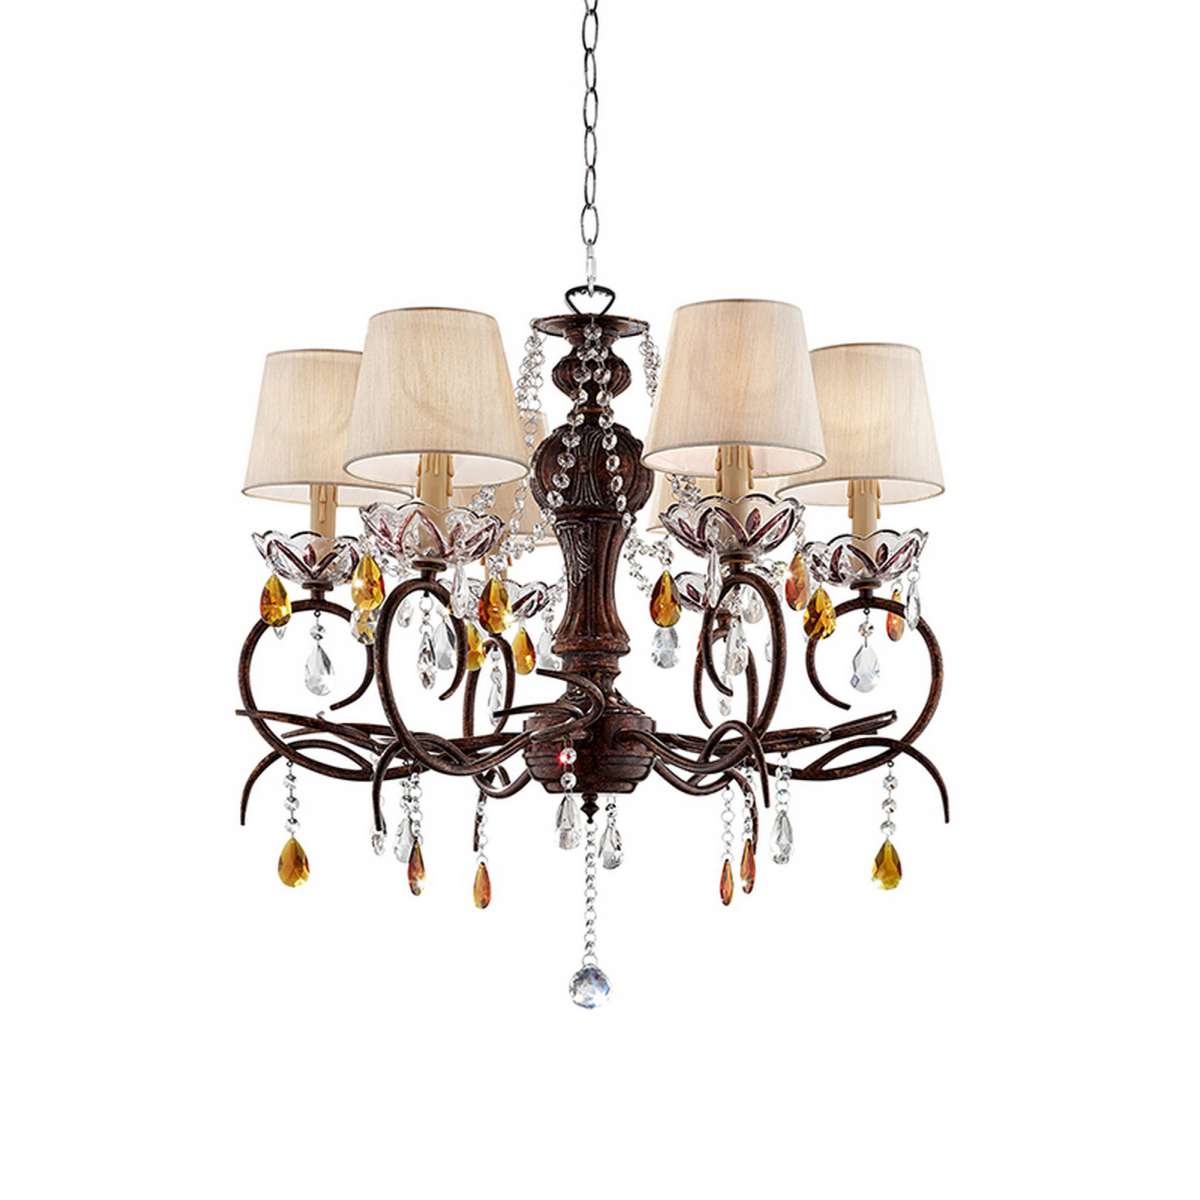 Ceiling Lamp With Scrolled Frame And 6 Bell Shade, Bronze By Benzara